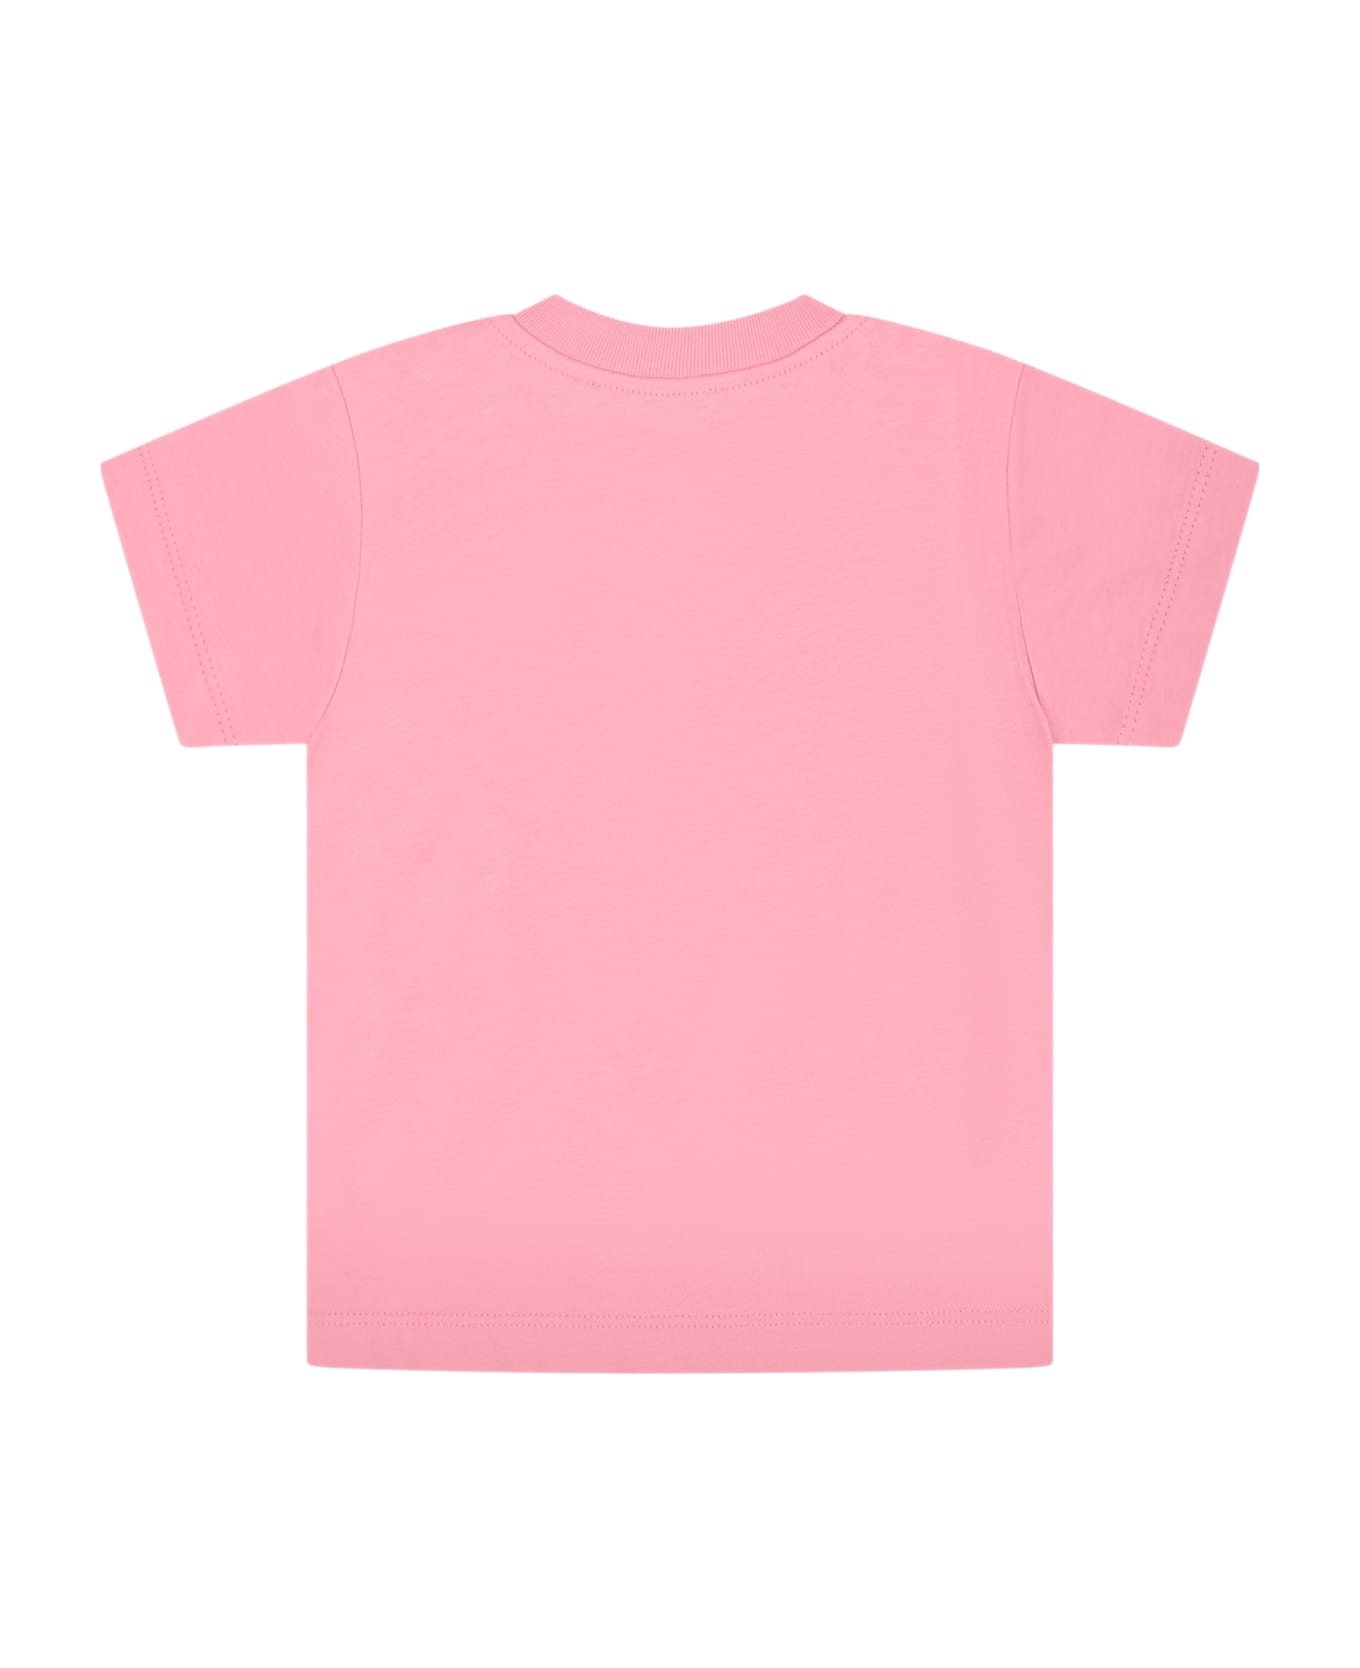 Marni Pink T-shirt For Girl With Logo - Pink